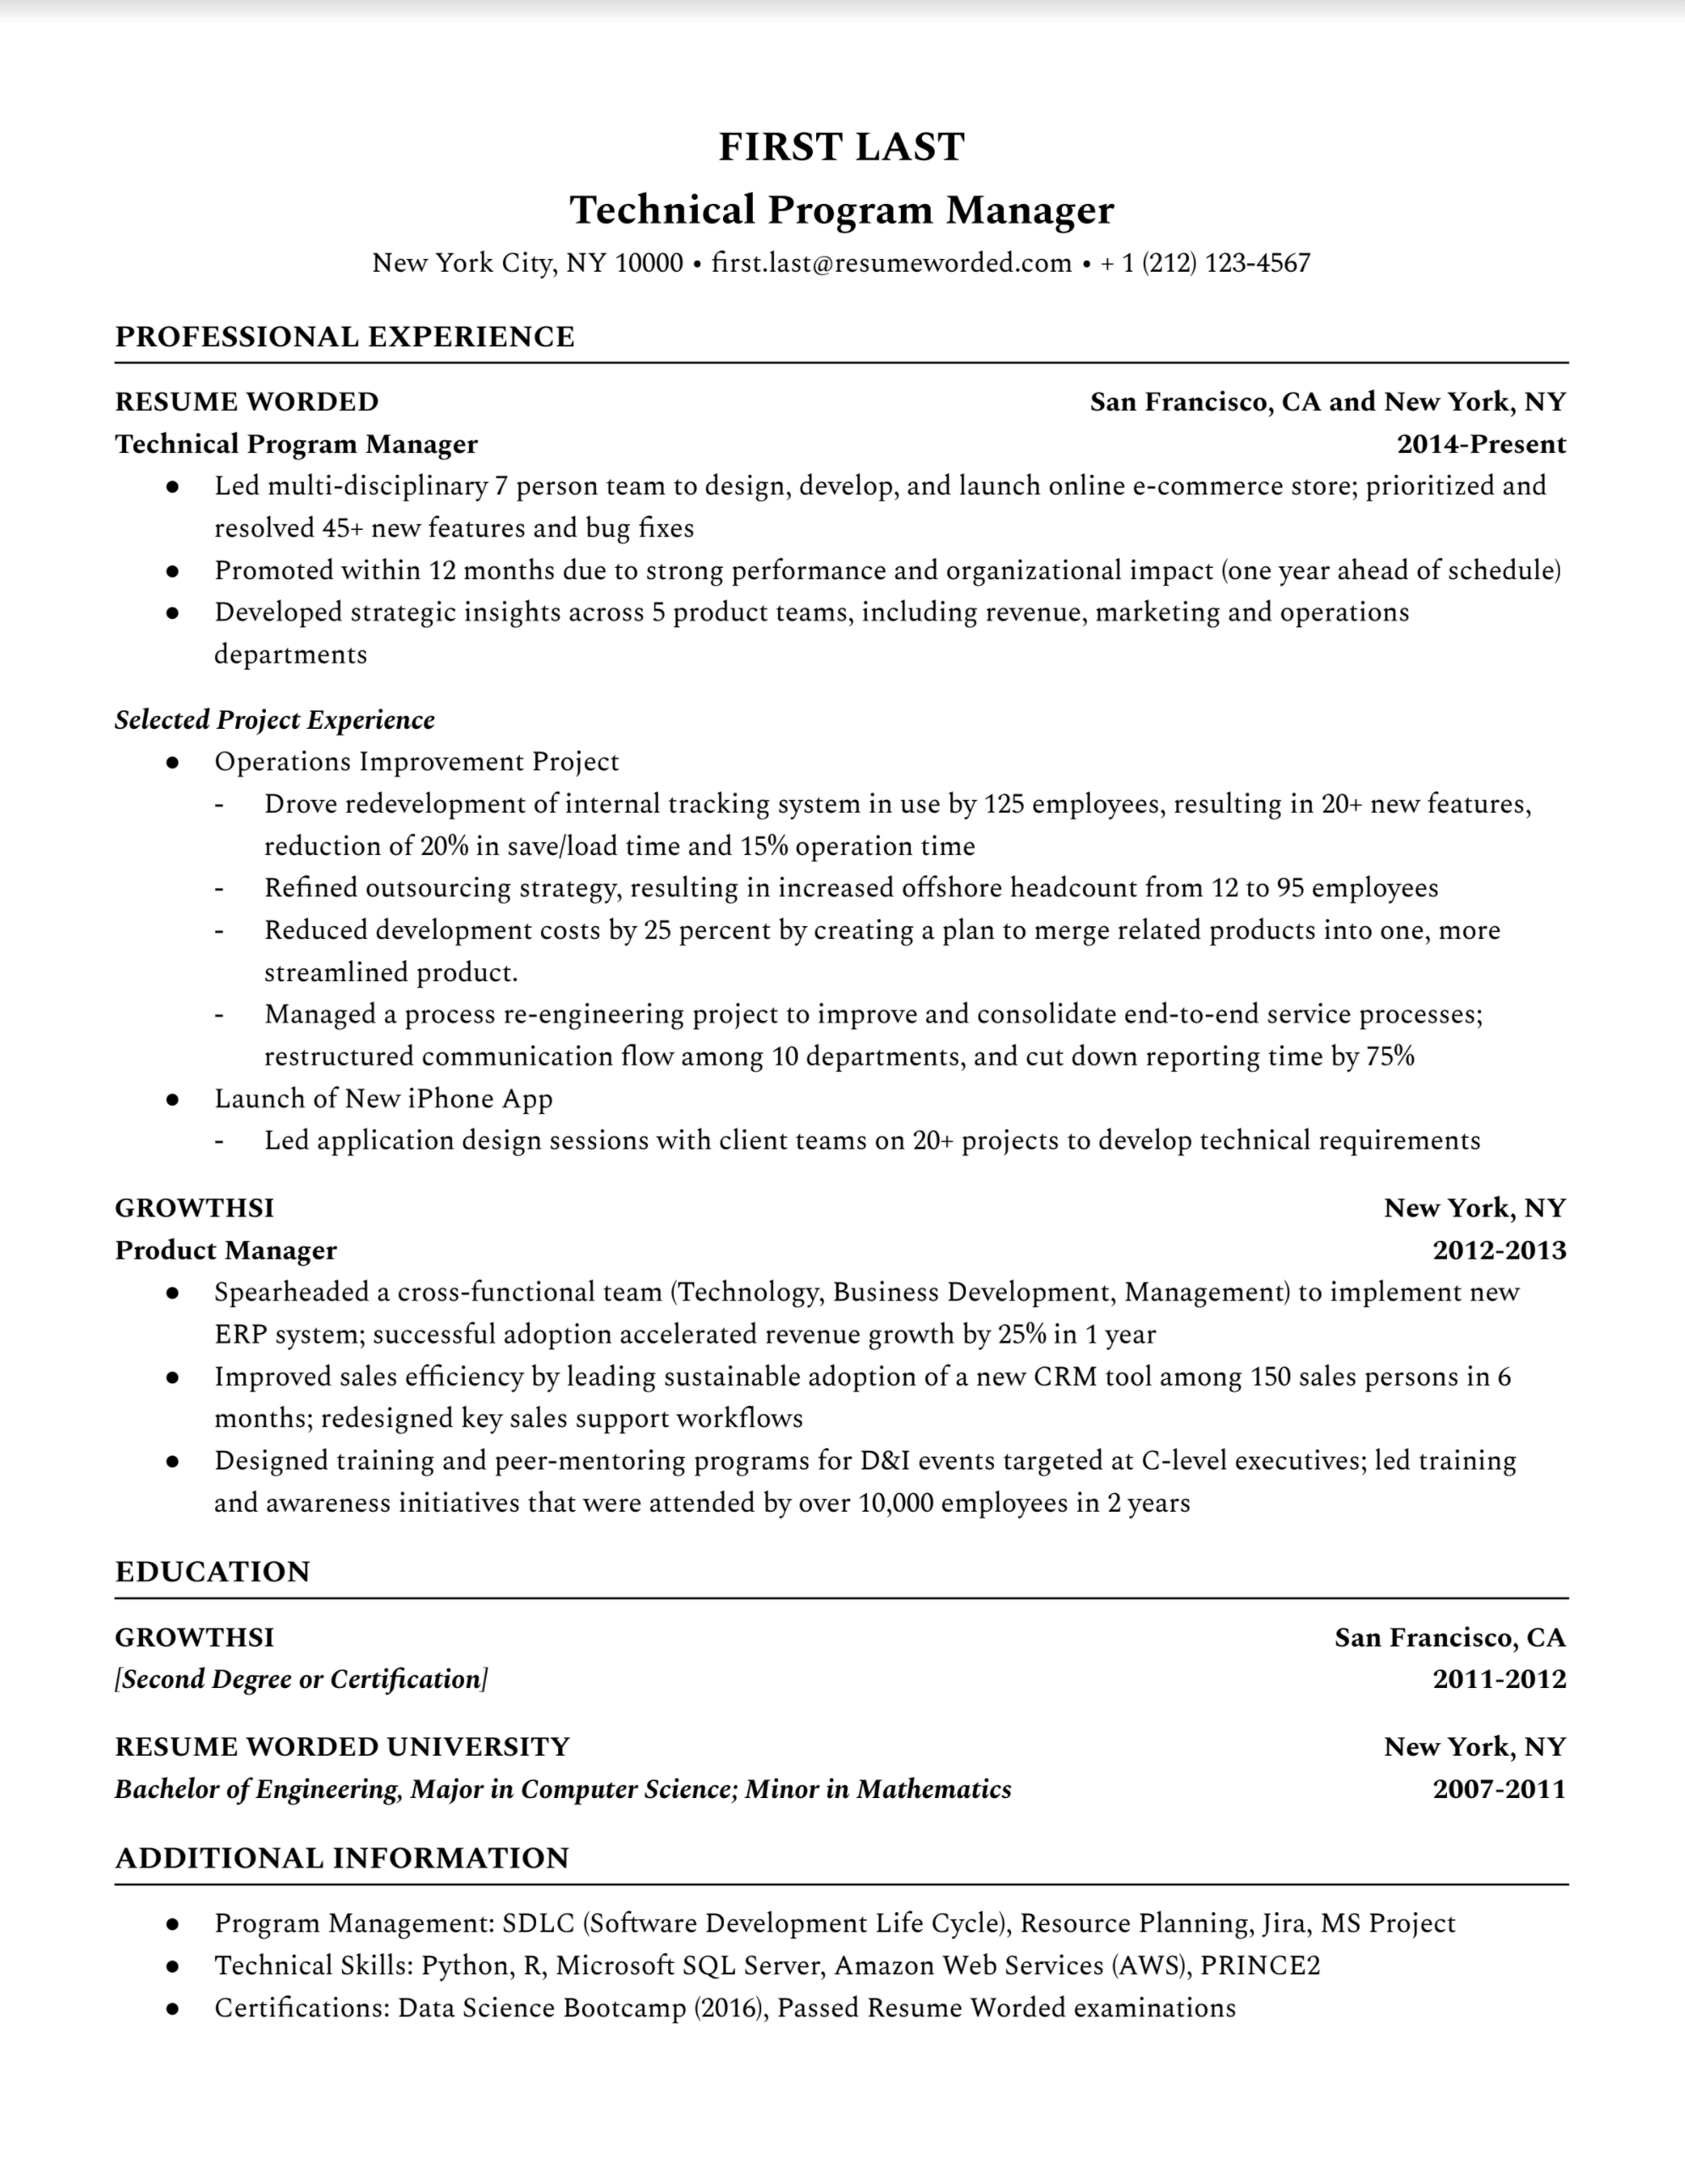 Technical Program Manager Resume Template + Example